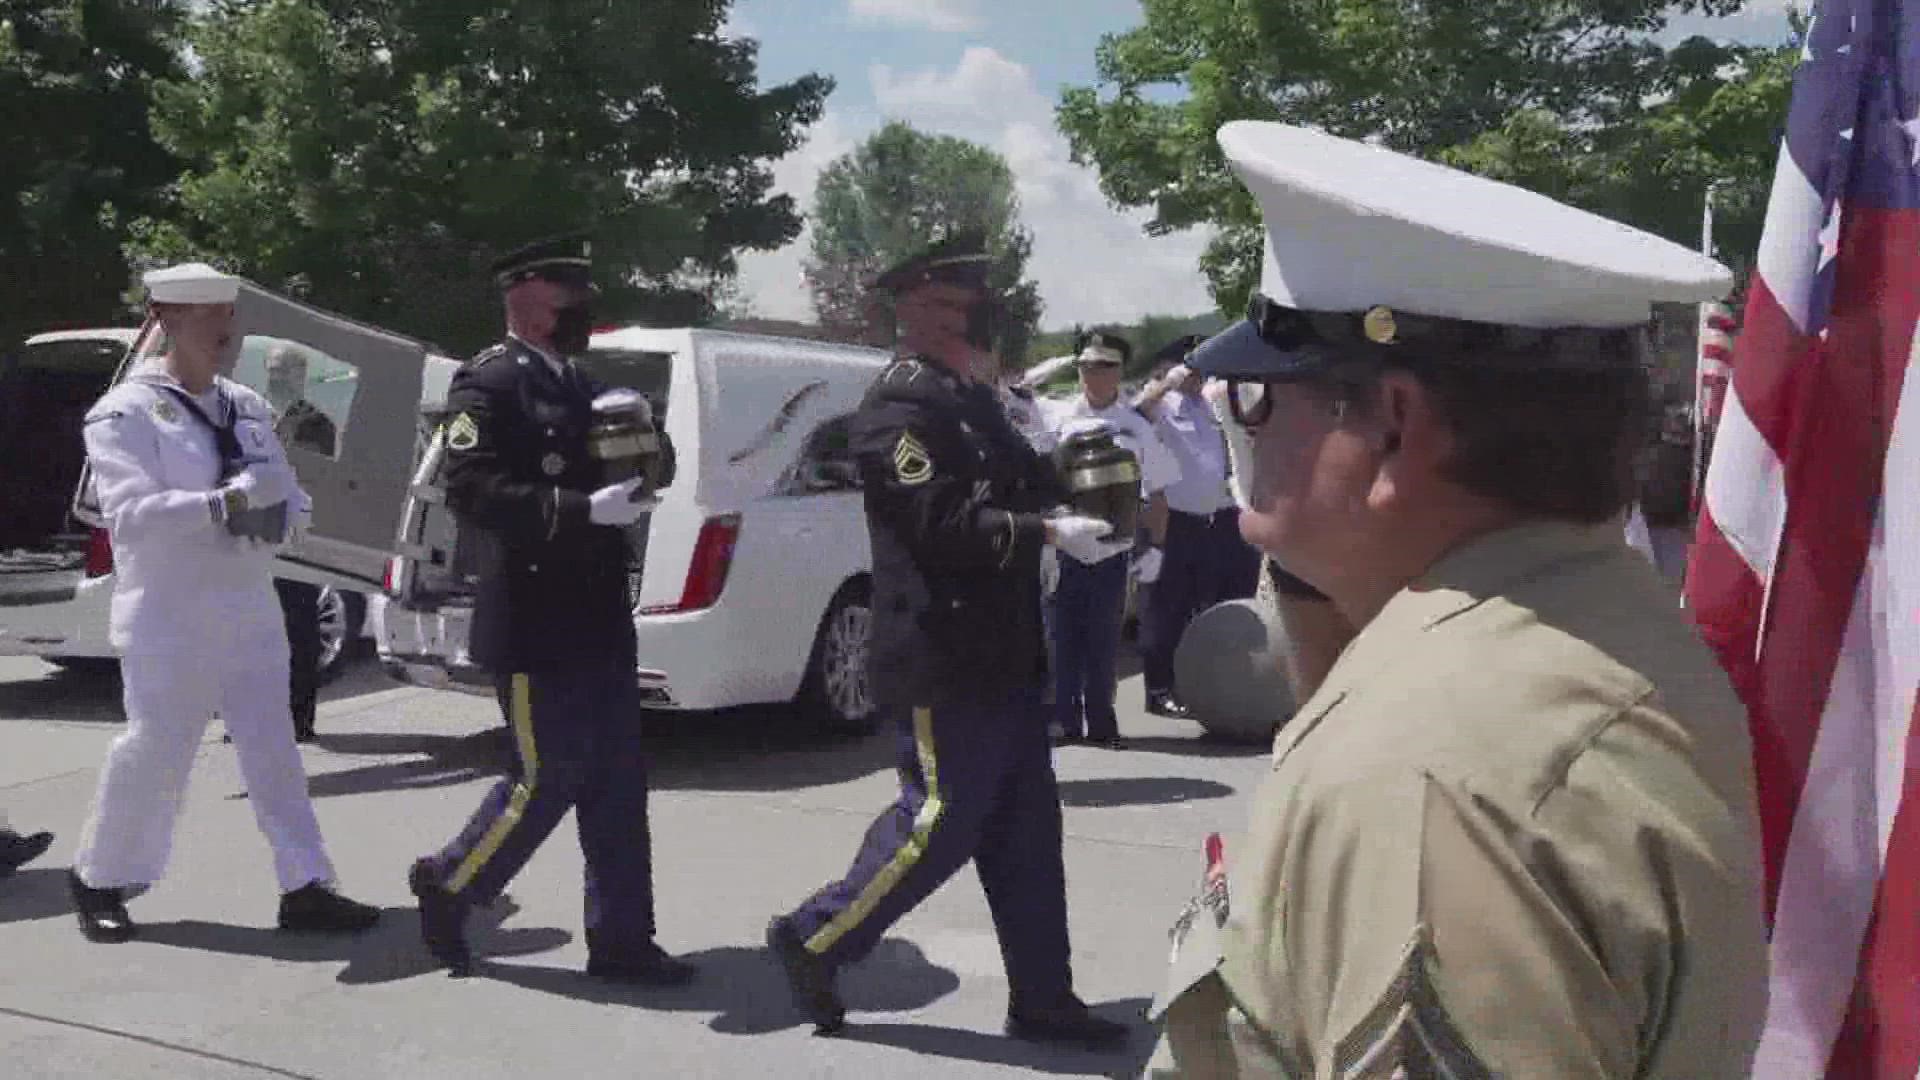 Nearly 100 people went to the East Tennessee Veterans Cemetery on Thursday to pay their respects.